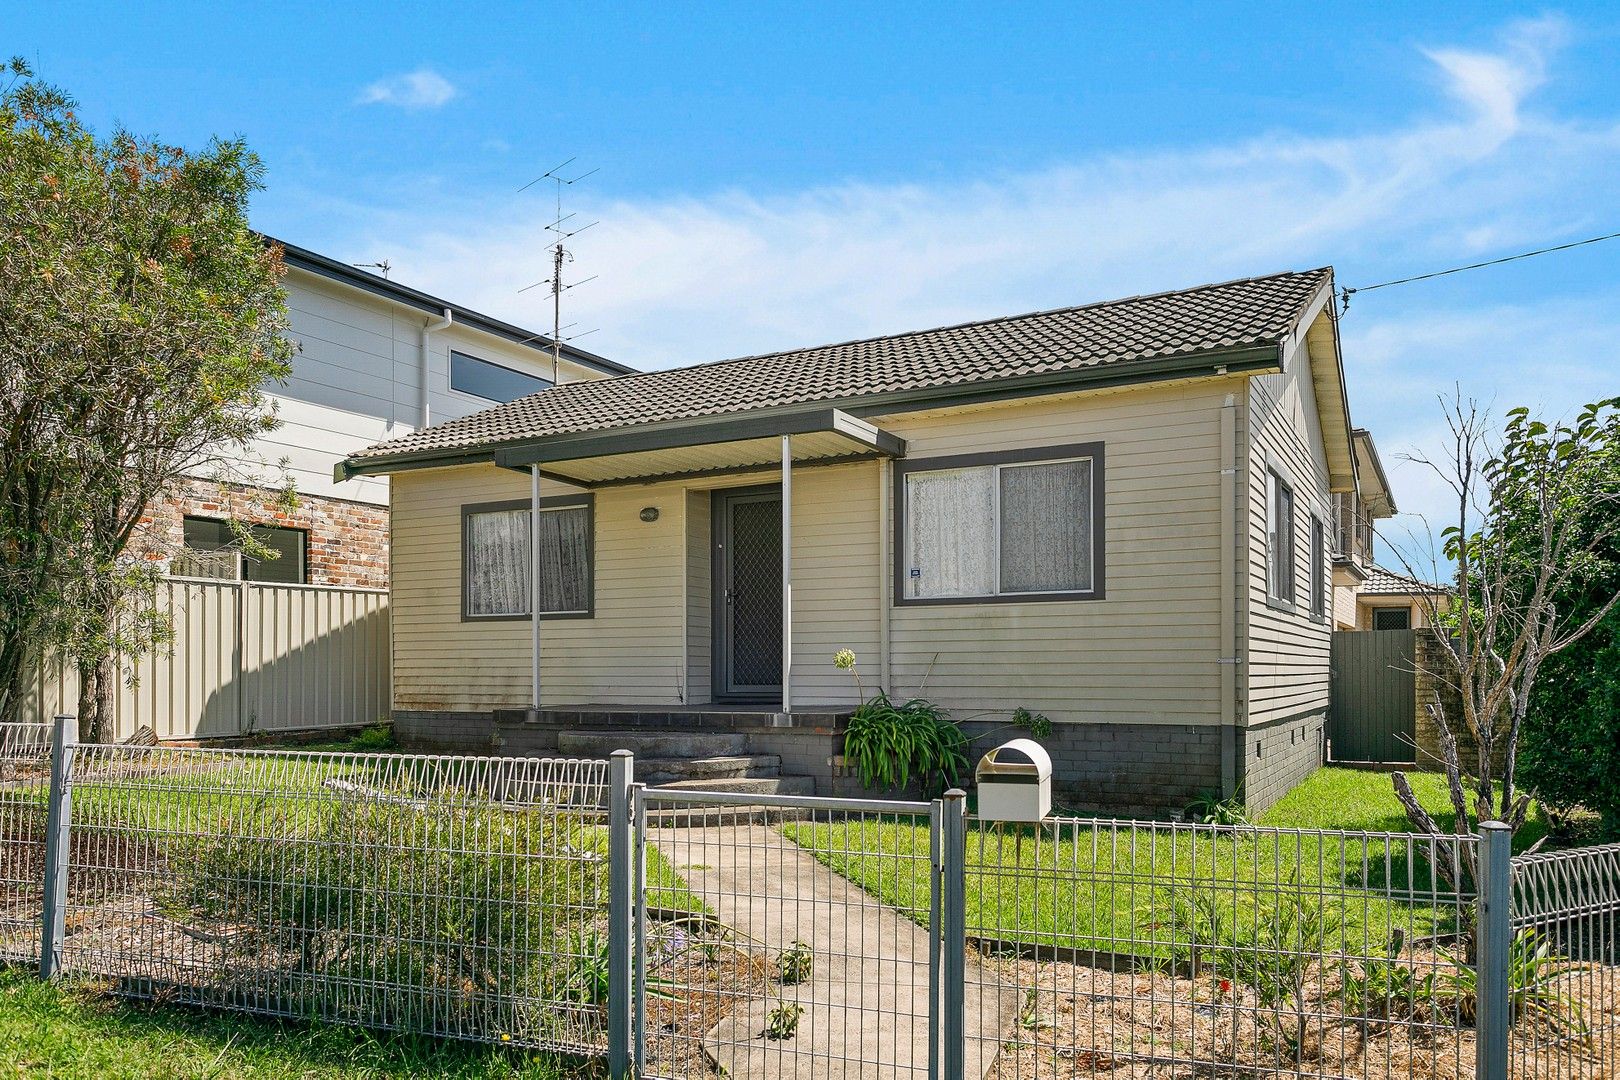 2 bedrooms House in 9 Barrack Avenue BARRACK HEIGHTS NSW, 2528